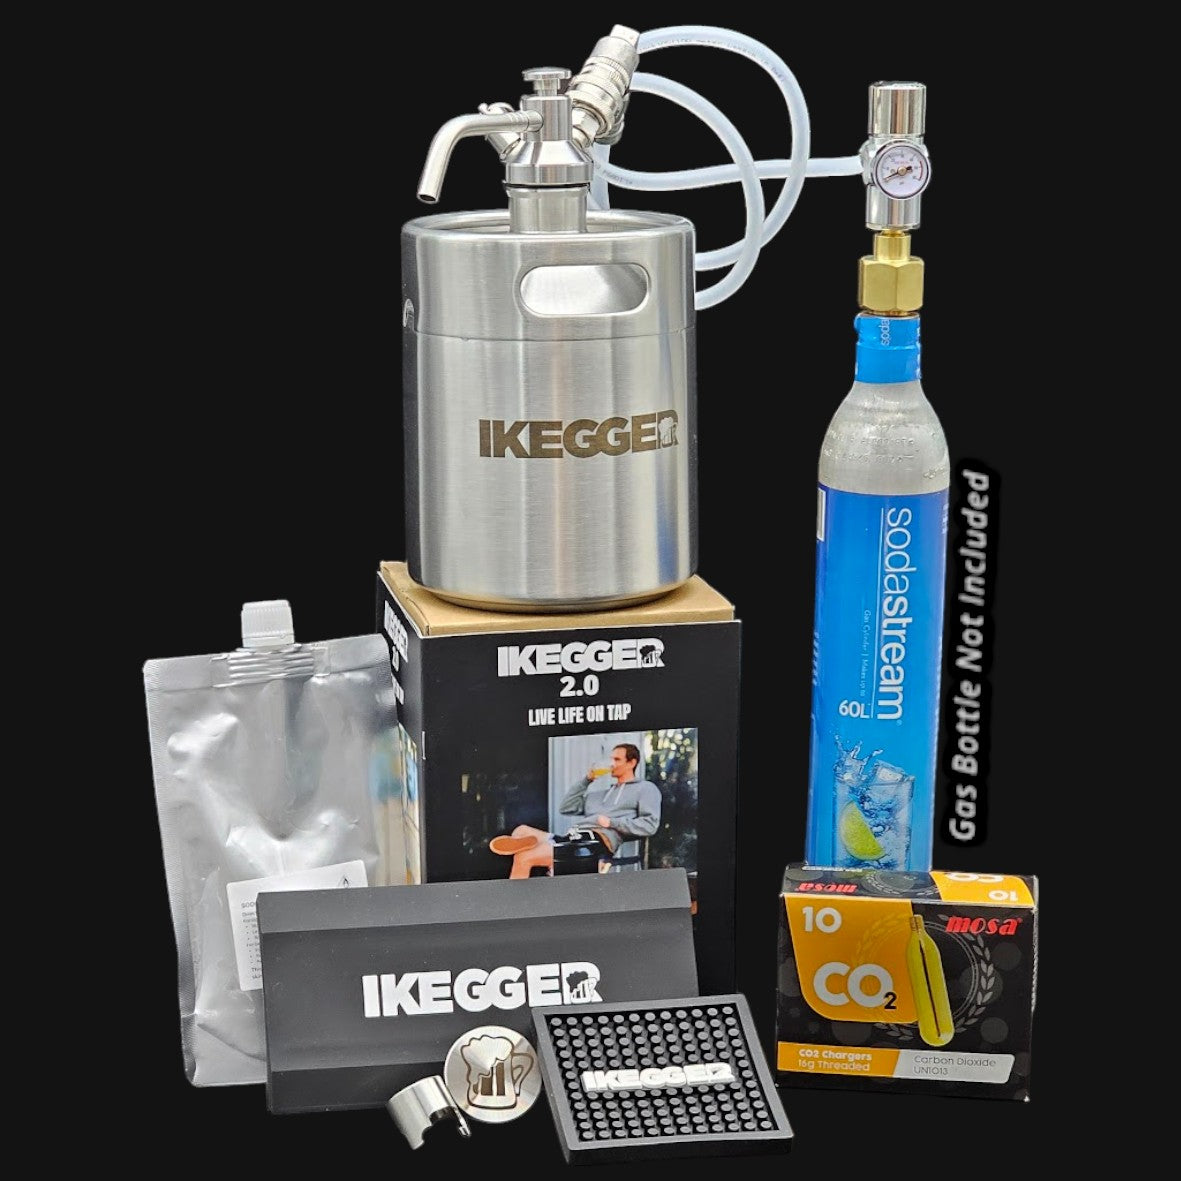 beer kegger mini 2l growler size with accessories and gas options